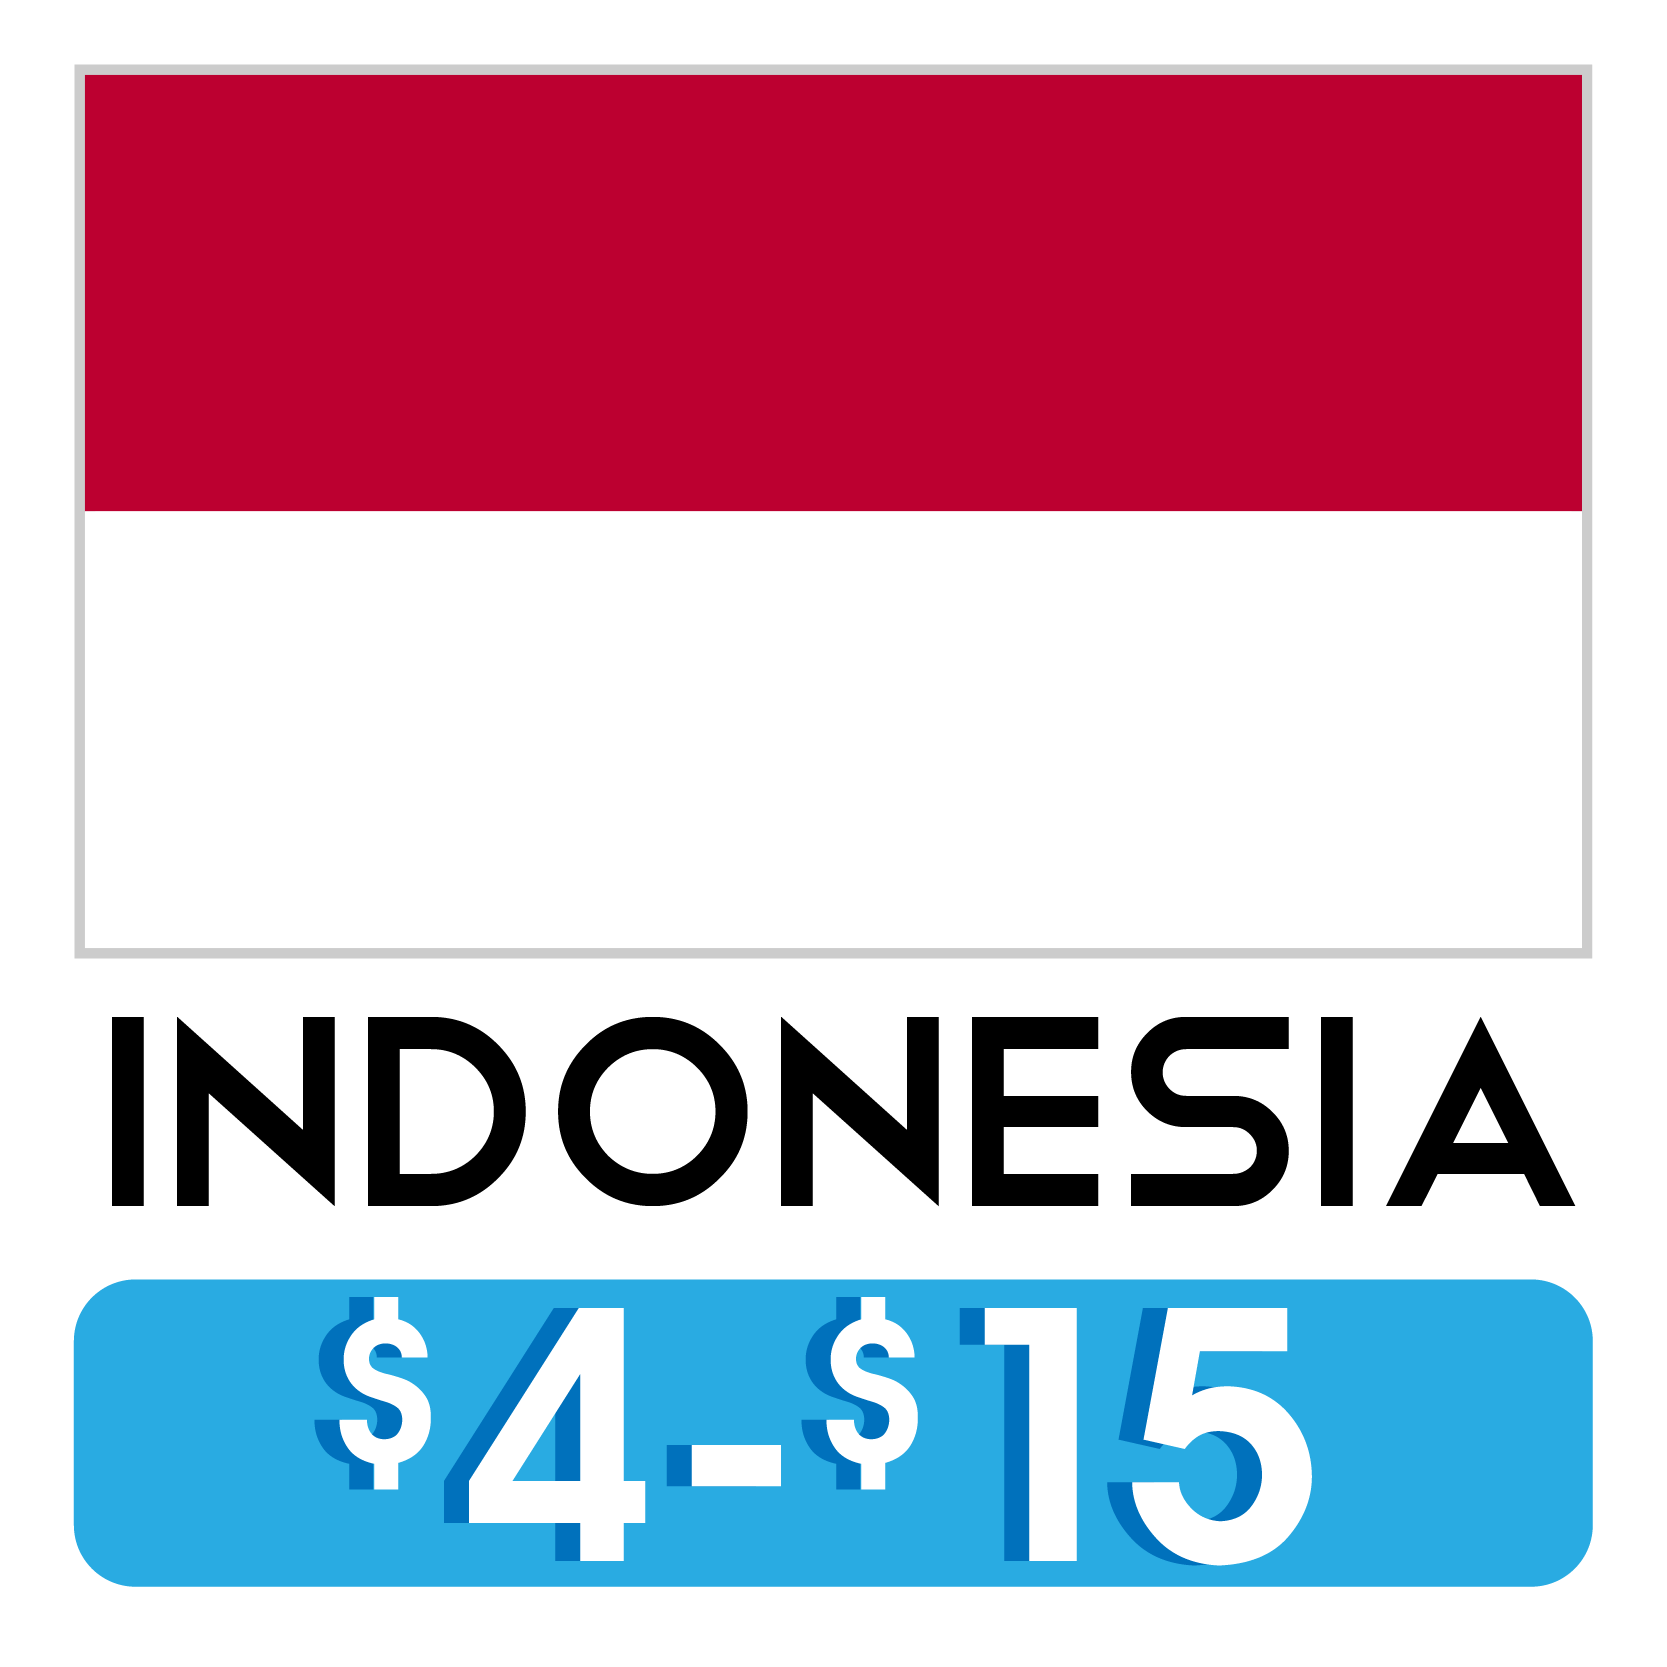 Costos_Hostales_Indonesia.png